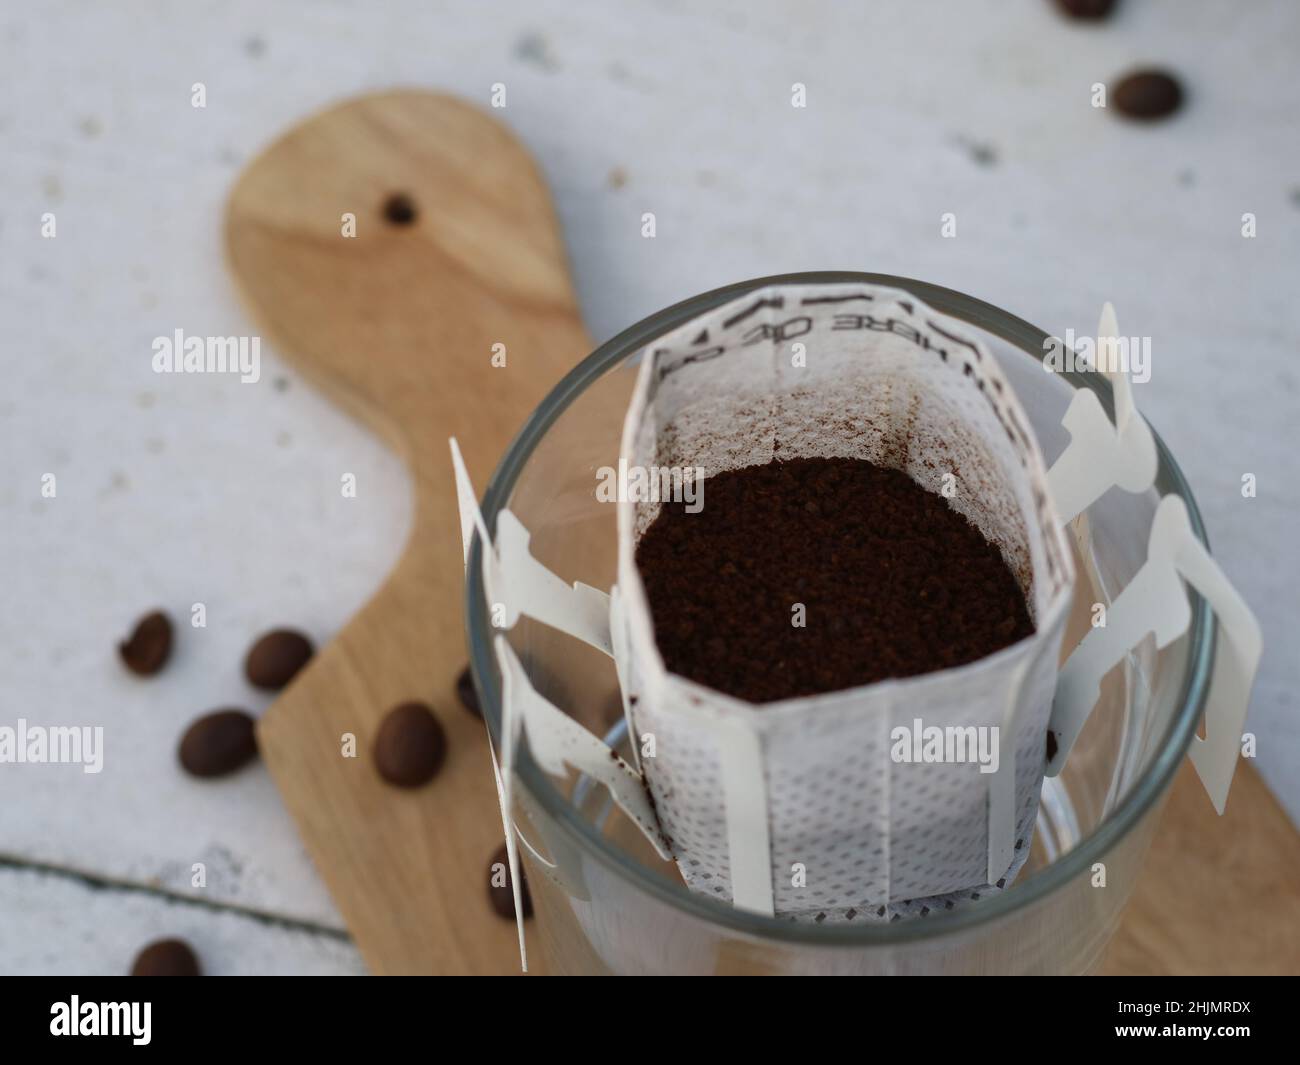 equipment for brewing drip bag coffee Stock Photo